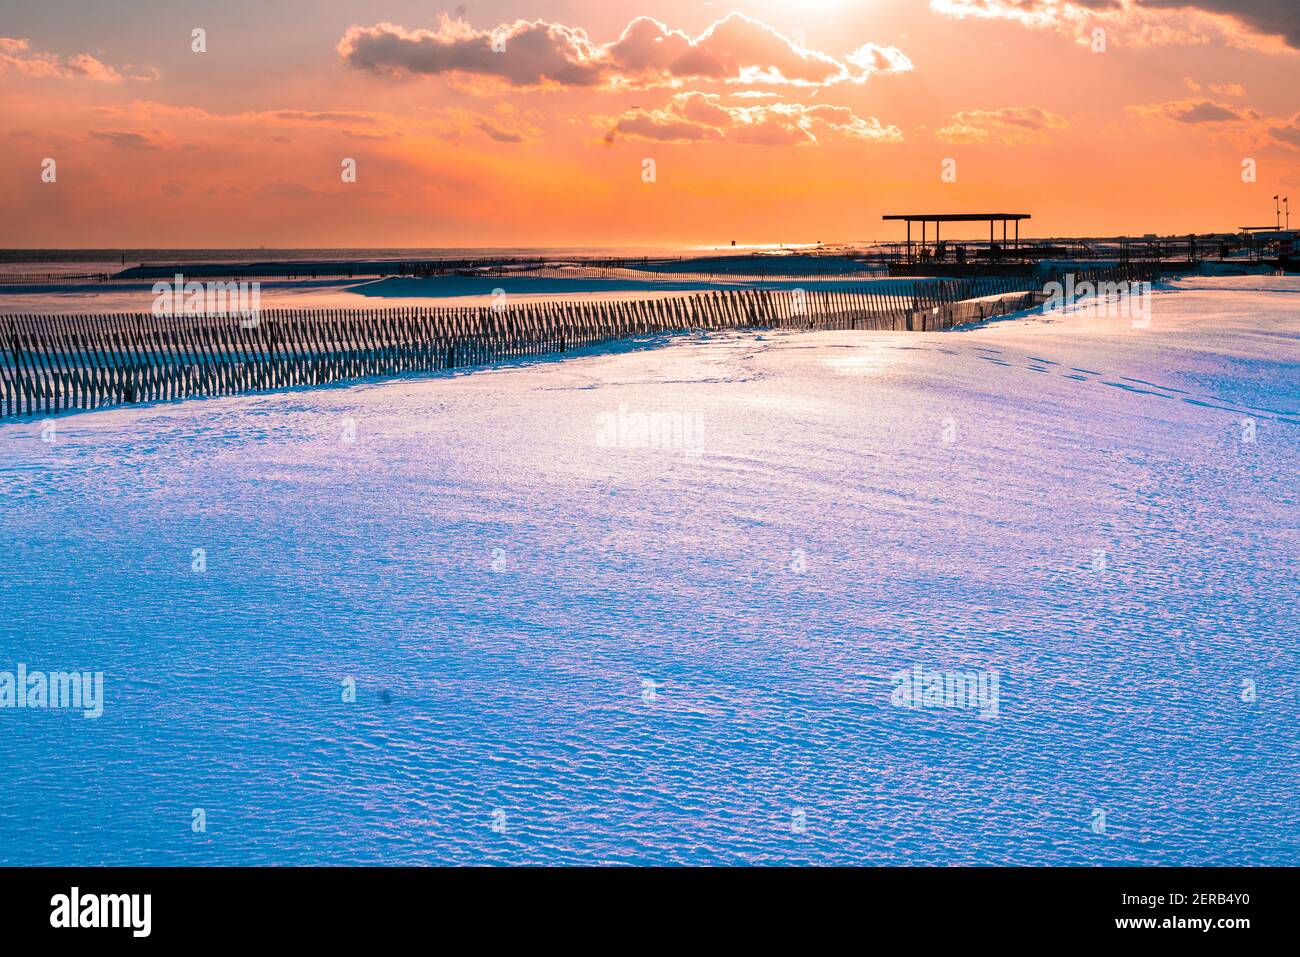 Winter scene under color sky at sunset on snow covered beach. Jones Beach State Park., Long Island NY Stock Photo